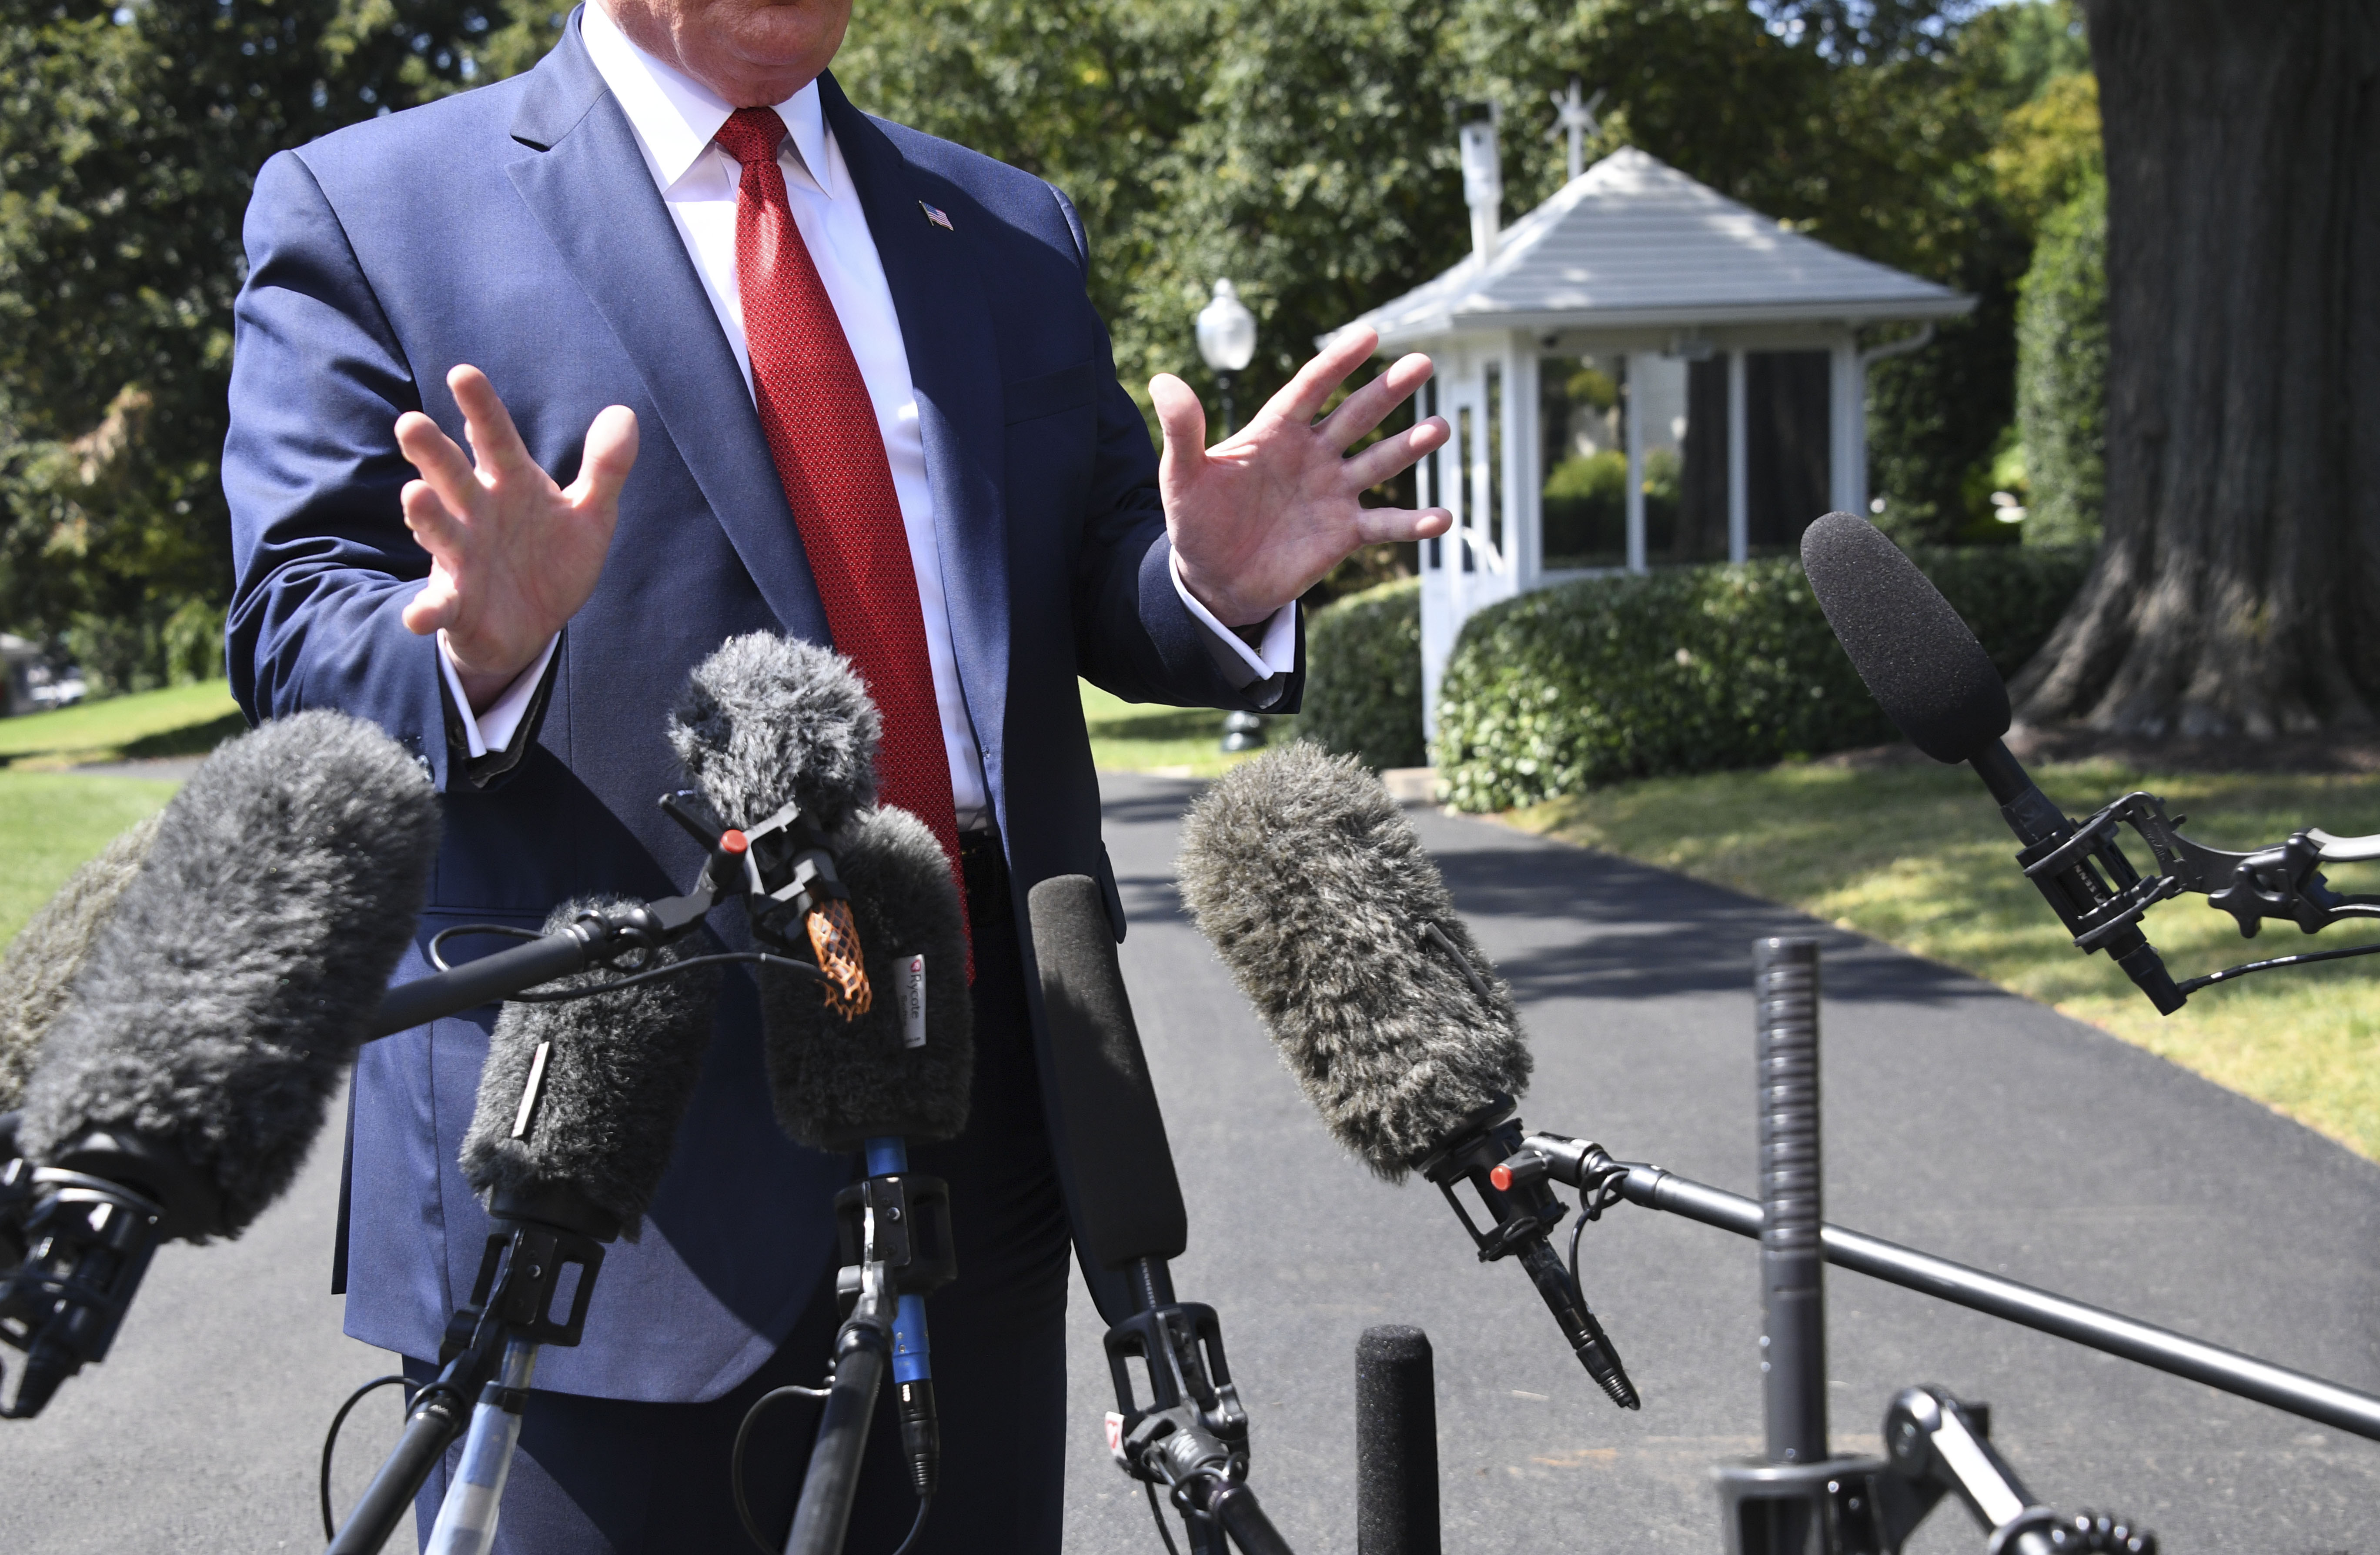 US President Donald Trump speaks to the media as he departs the White House in Washington, DC, on August 21, 2019. (Photo by Jim WATSON / AFP) (Photo credit should read JIM WATSON/AFP/Getty Images)